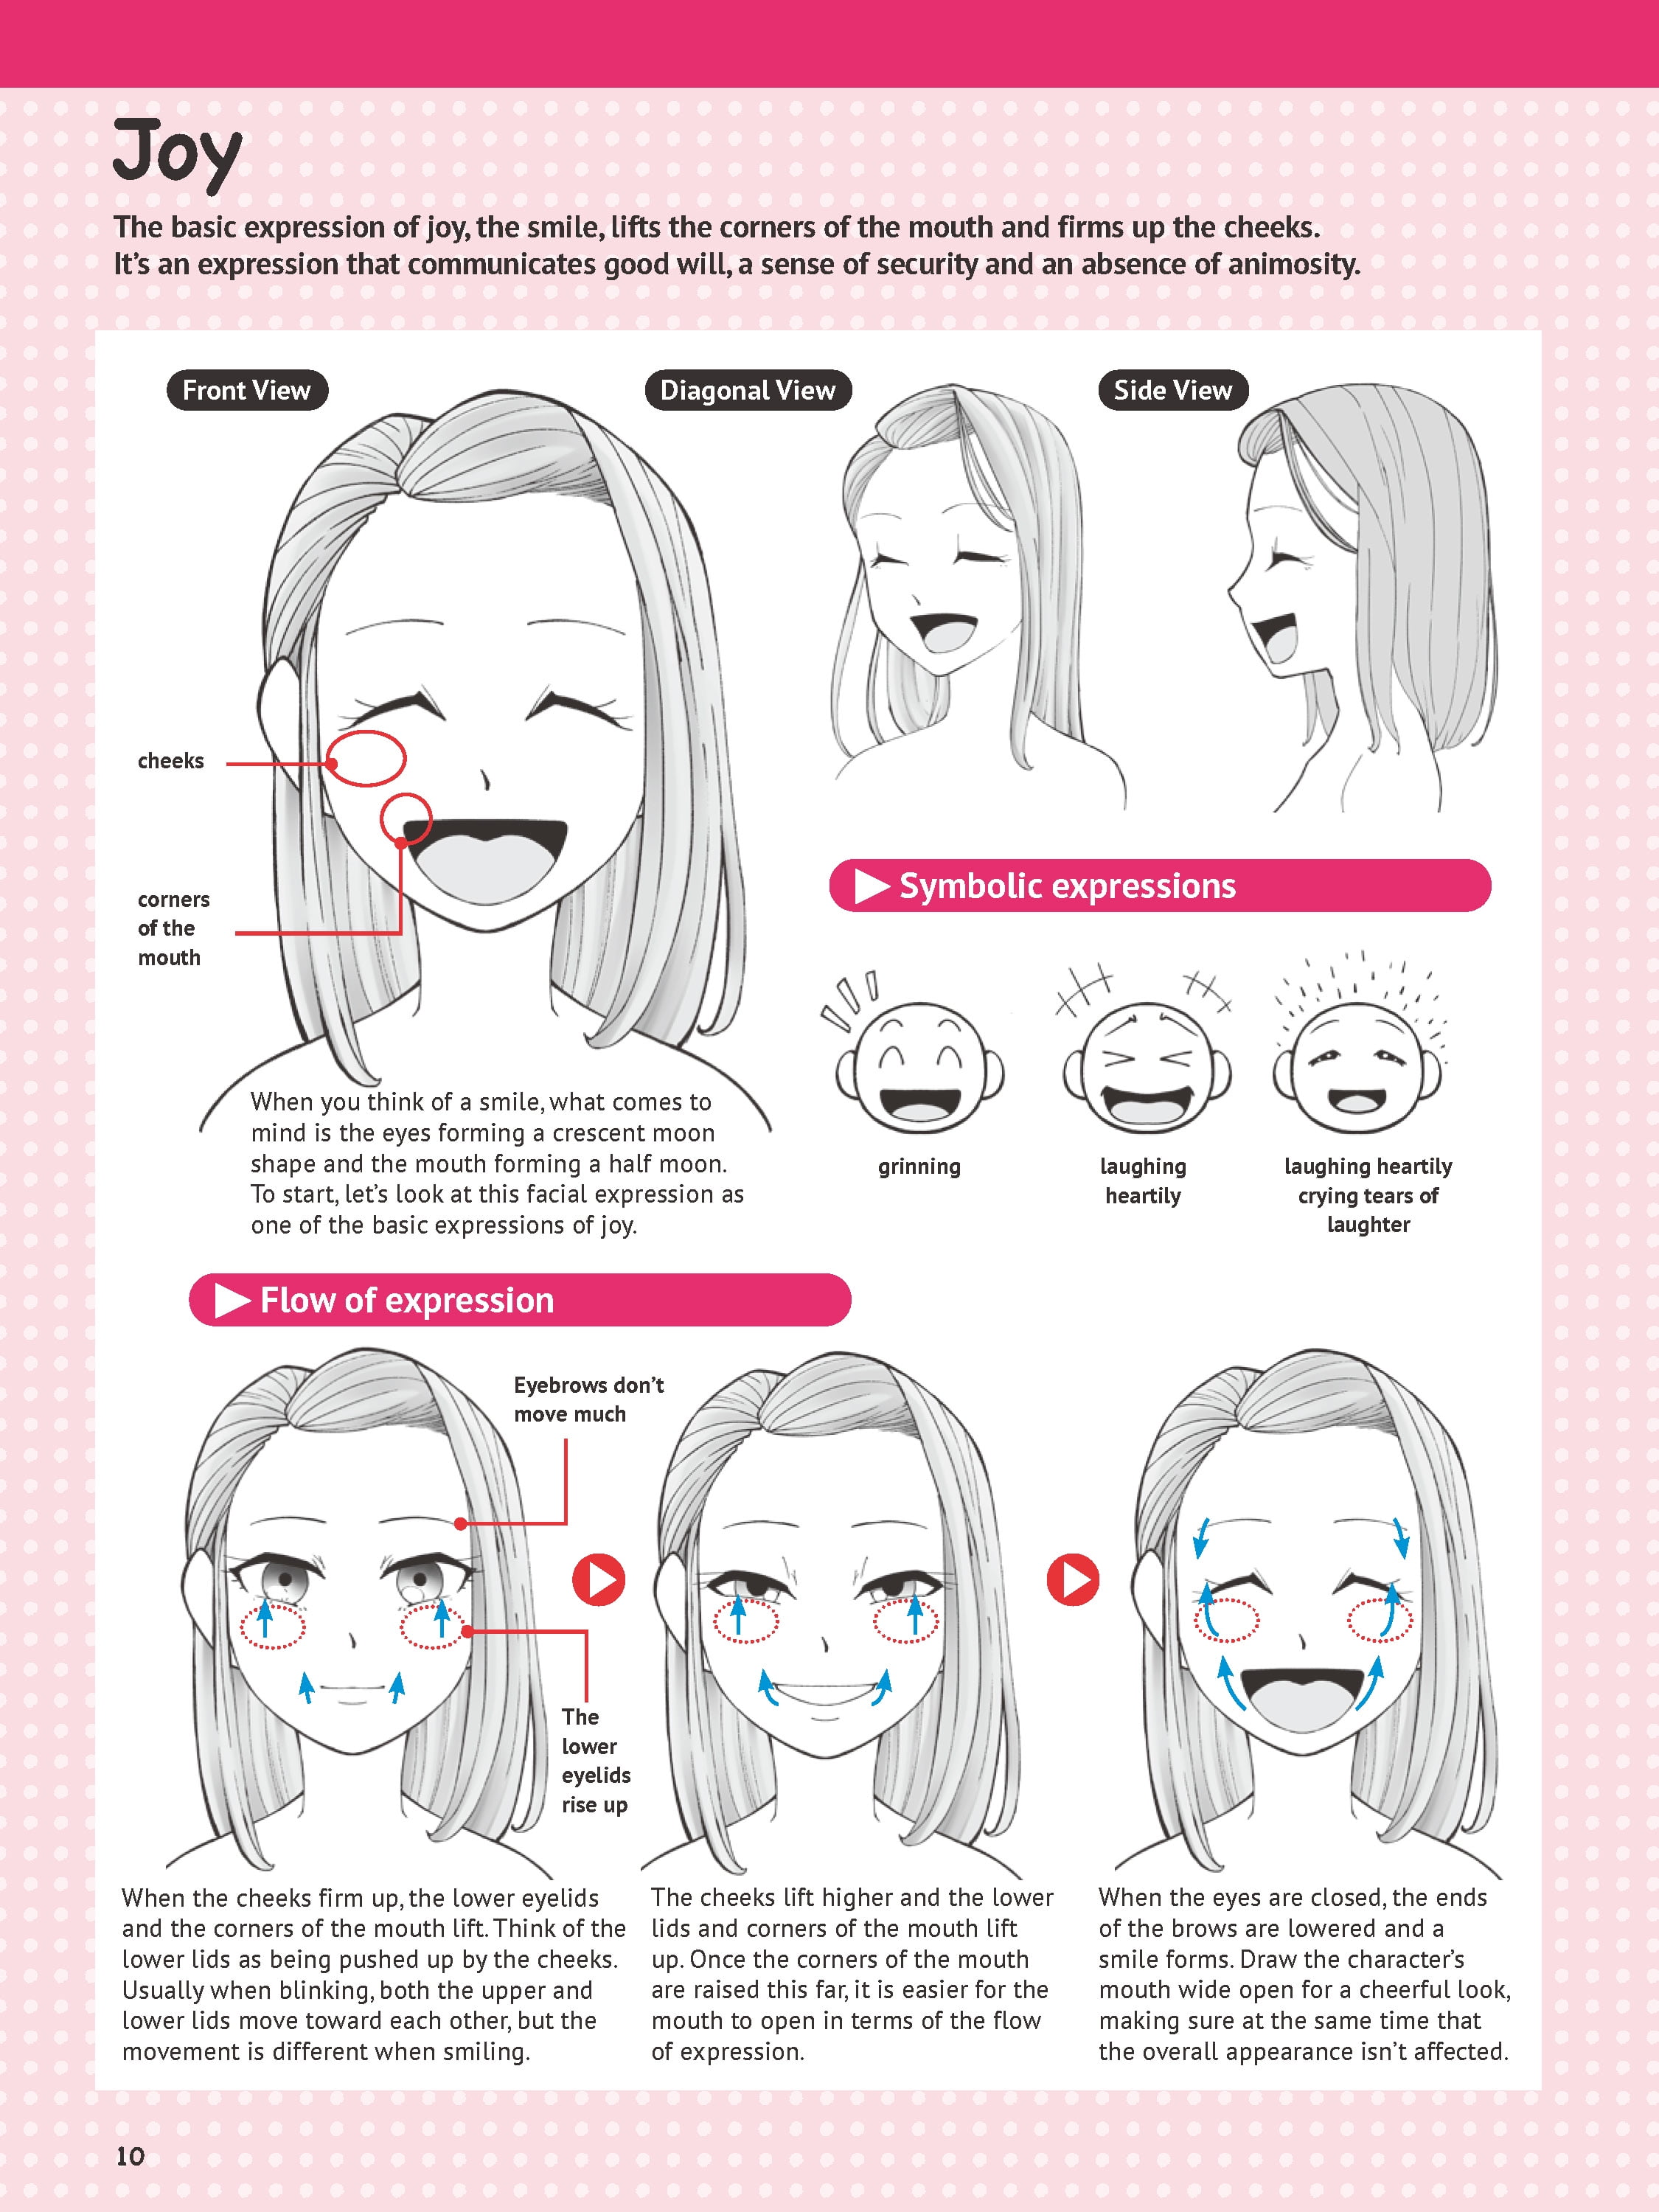 Easy Drawing Guides on X: Learn How to Draw Anime and Manga Facial  Expressions: Easy Step-by-Step Drawing Tutorial for Kids and Beginners. # Anime and #Manga #FacialExpressions #drawingtutorial #easydrawing See the  full tutorial